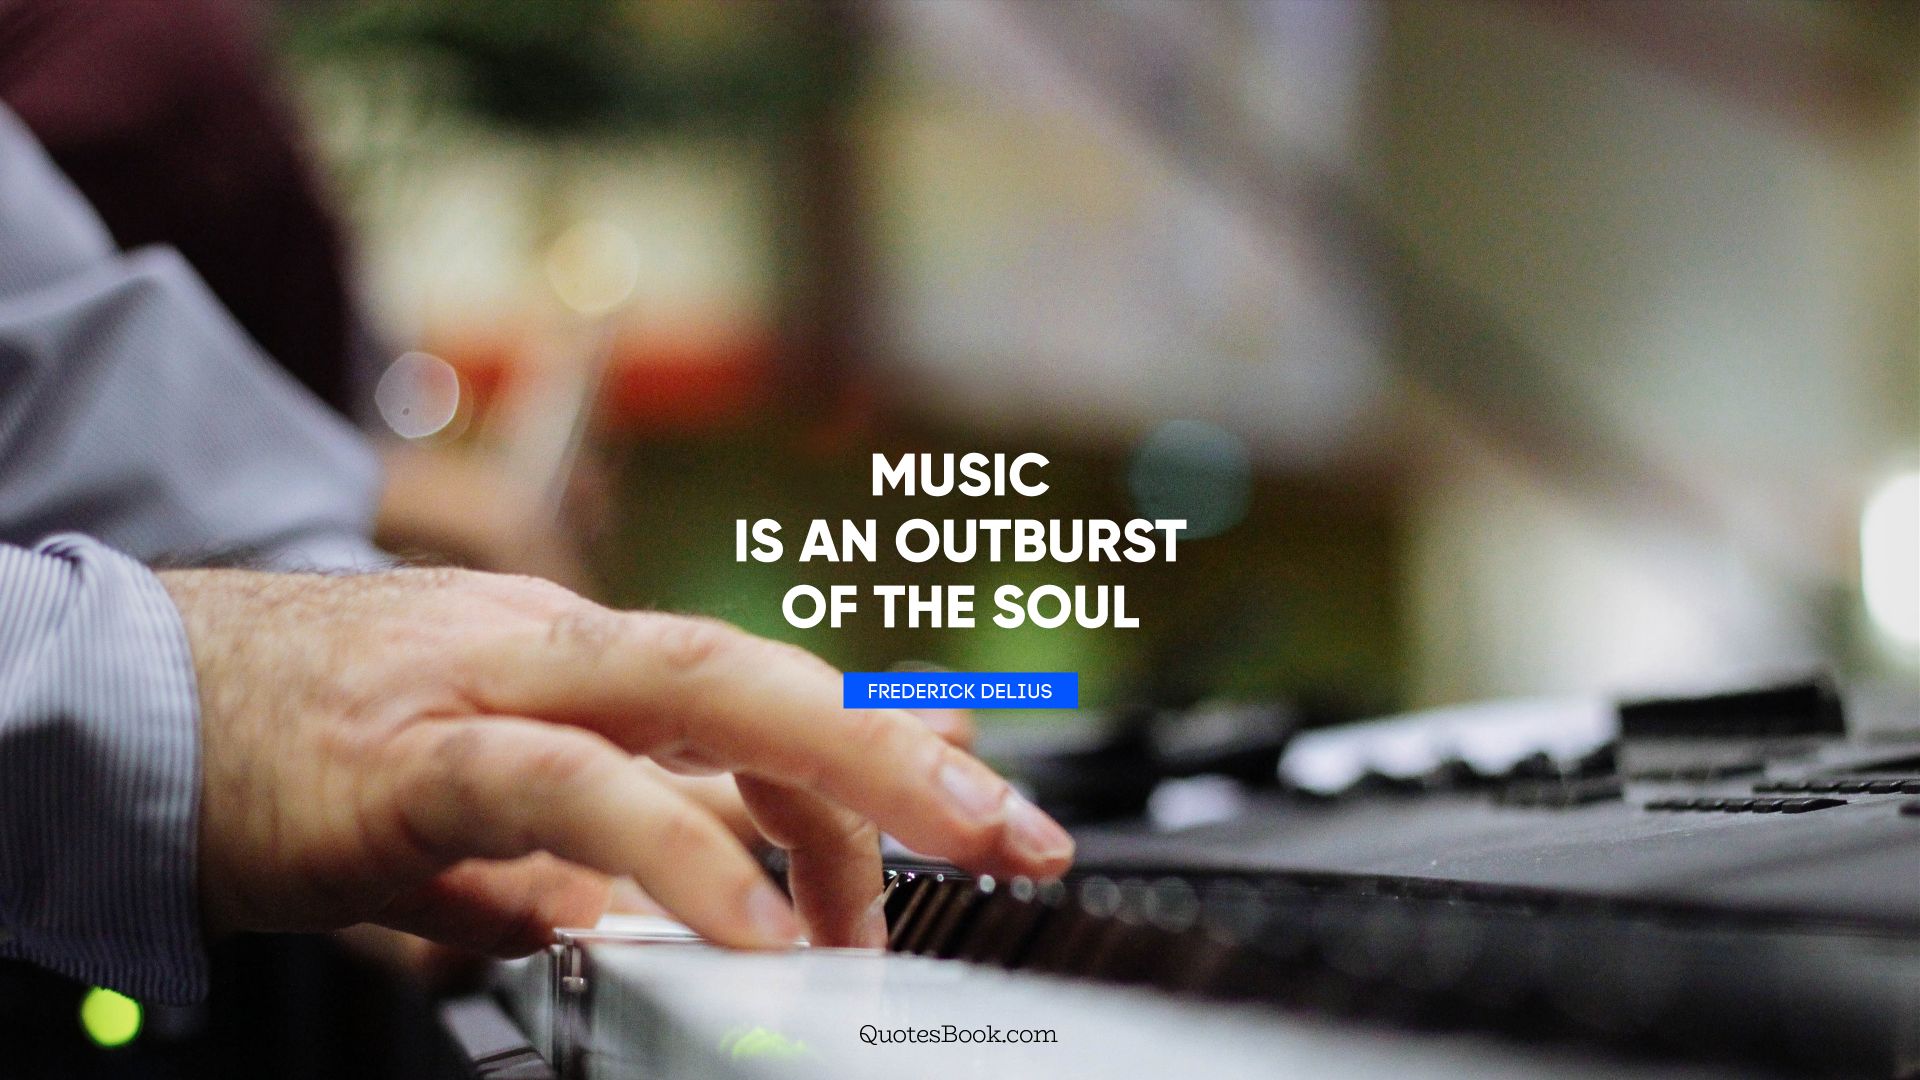 Music is an outburst of the soul. - Quote by Frederick Delius